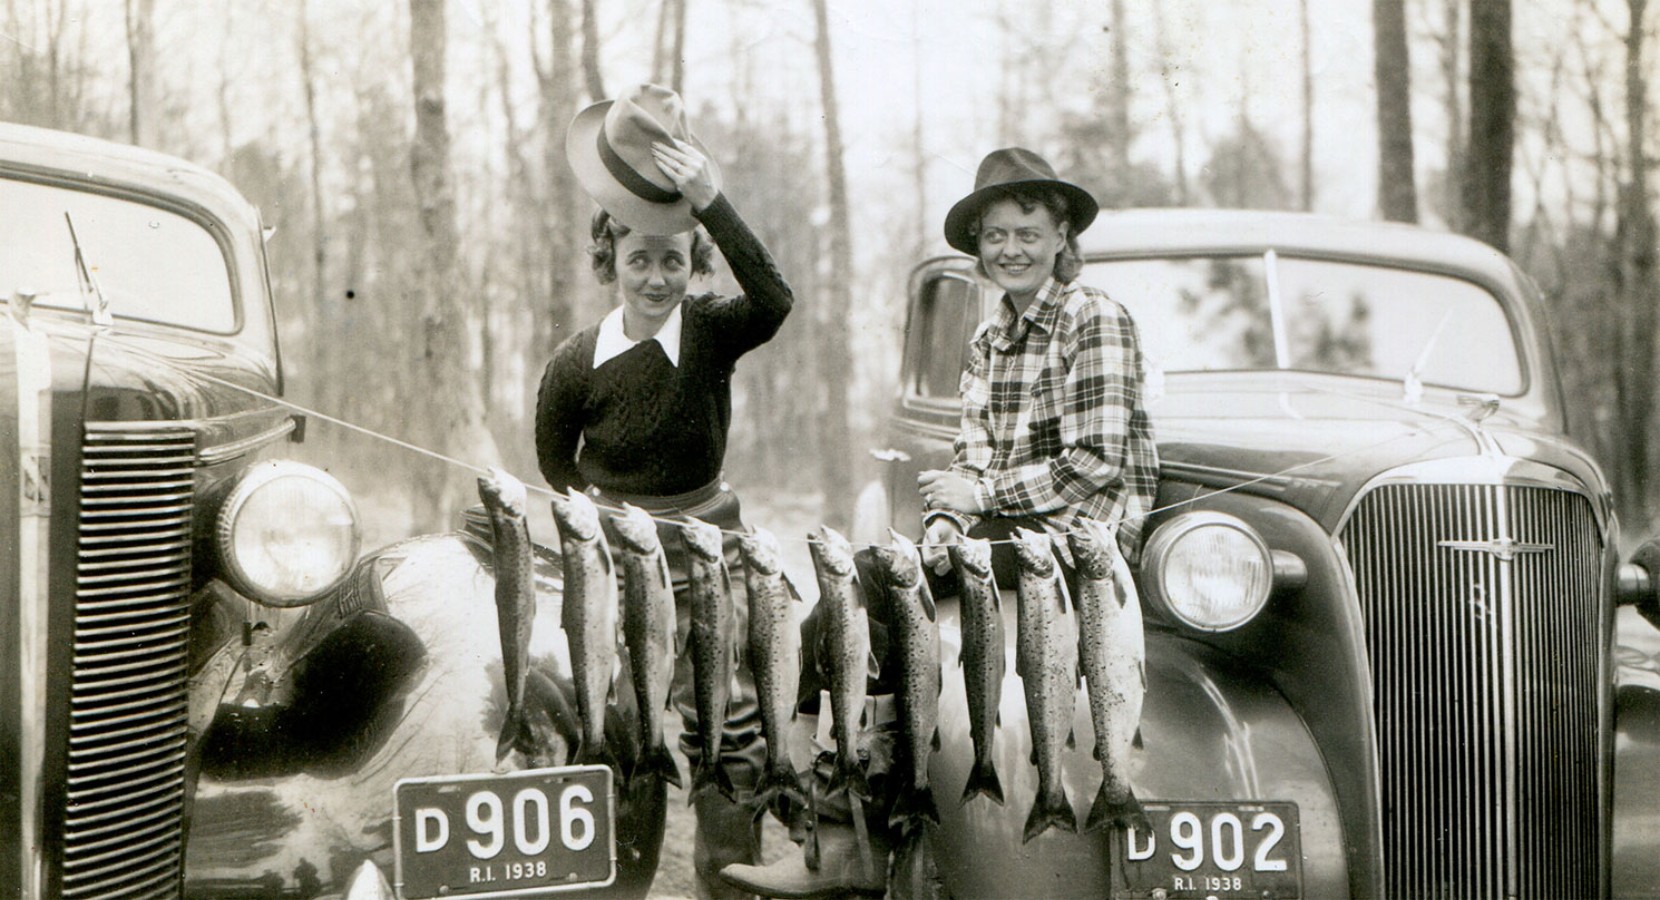 Atha Inerson and Hazel Bean with fish they've caught.